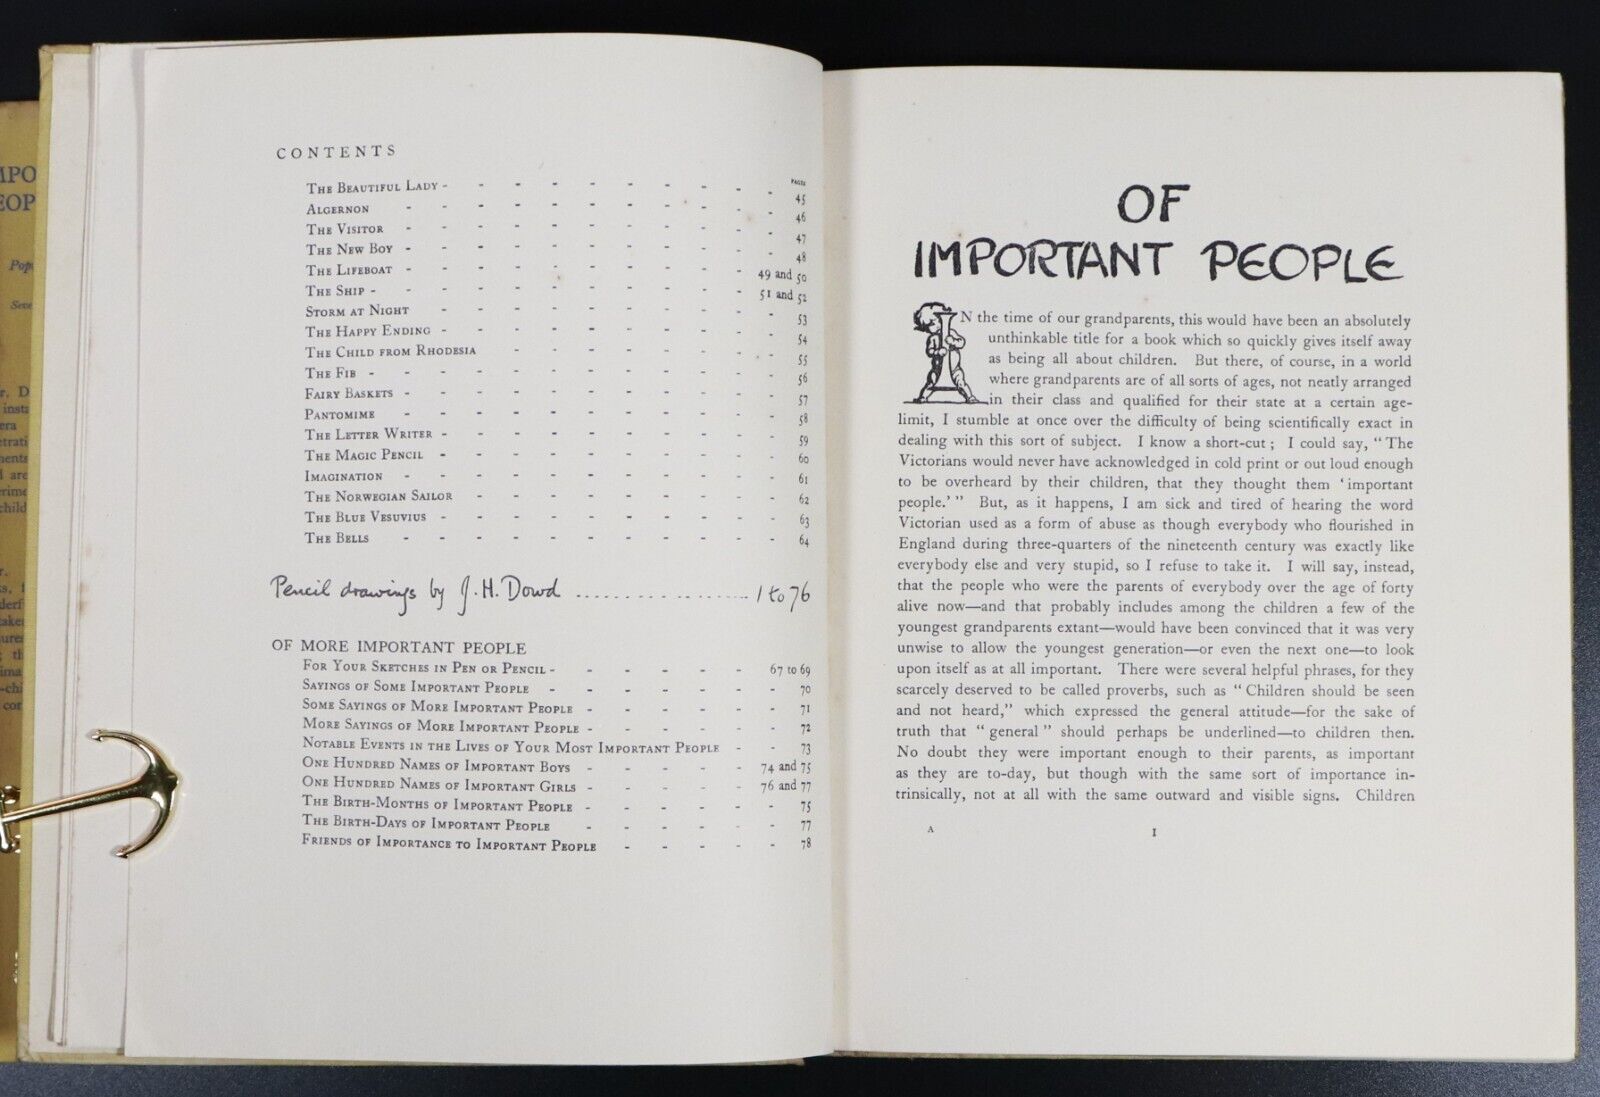 1936 Important People by J.H. Dowd British Art Book Of Sketches B.E. Spender